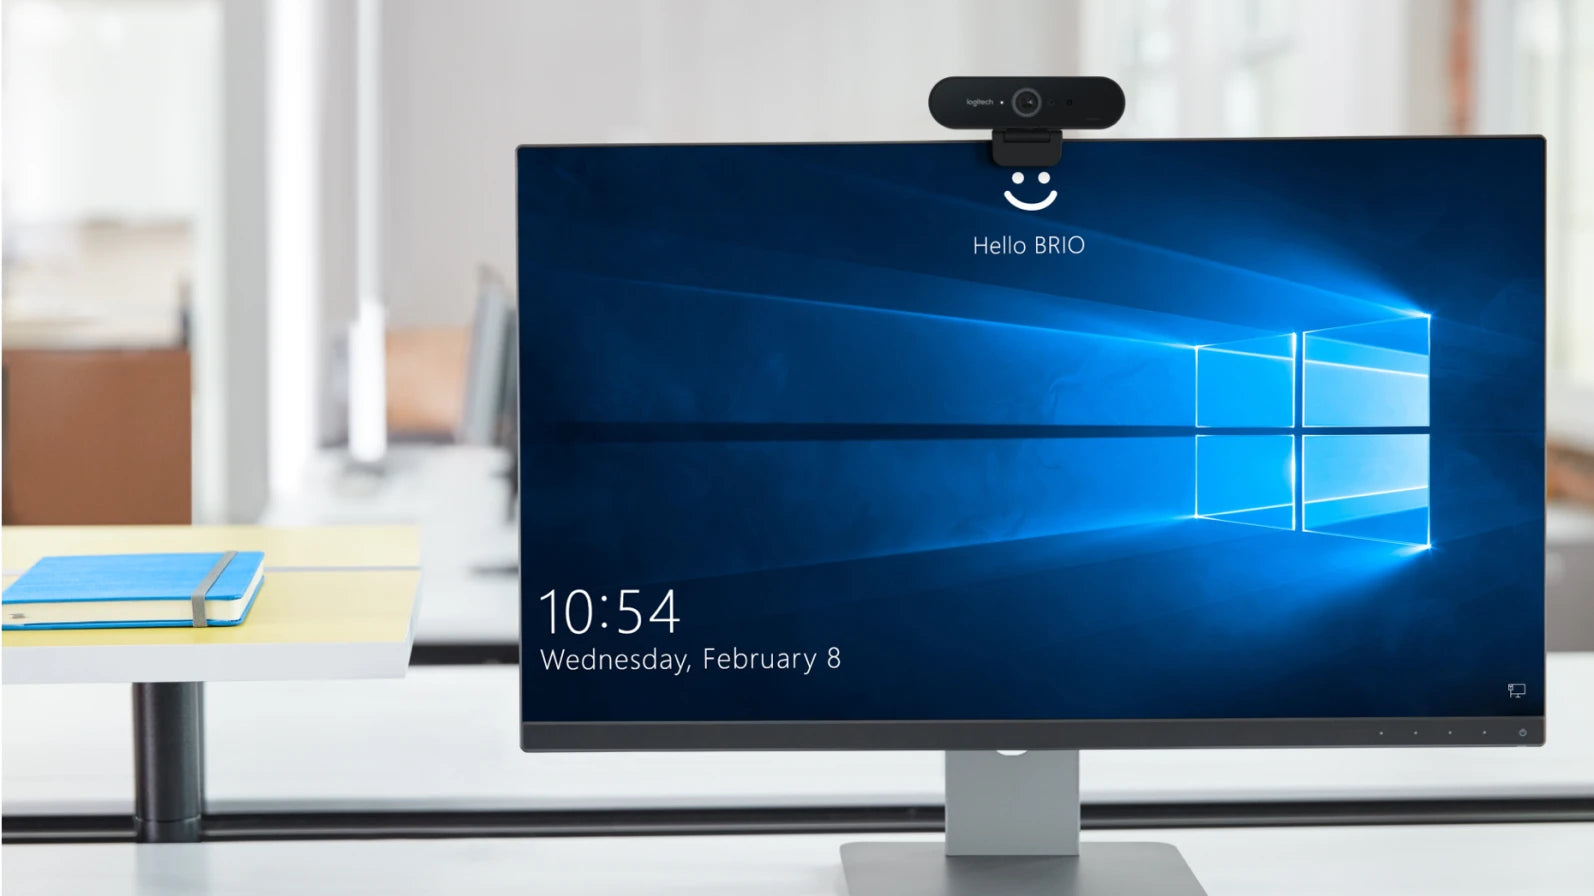 SECURITY MEETS CONVENIENCE Powered by both optical and infrared sensors, Brio delivers fast and secure facial recognition for Windows Hello. And no need to type a password for Windows 10: simply look into the Brio lens to login.